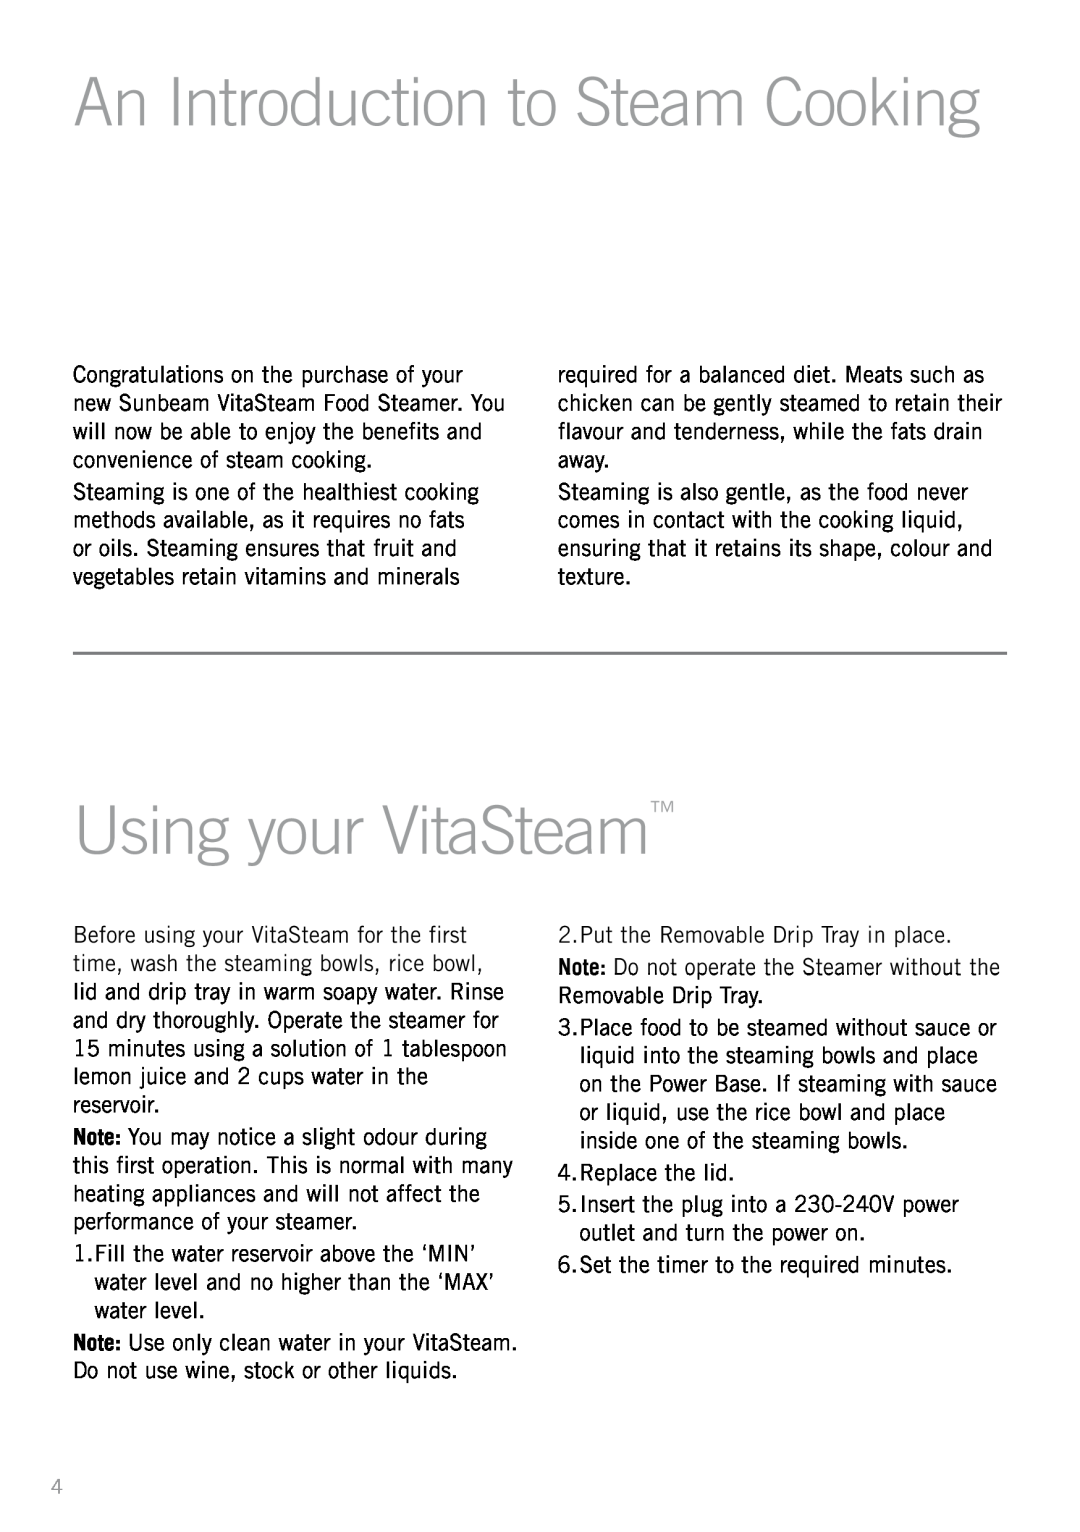 Sunbeam ST6650 manual An Introduction to Steam Cooking, Using your VitaSteam 